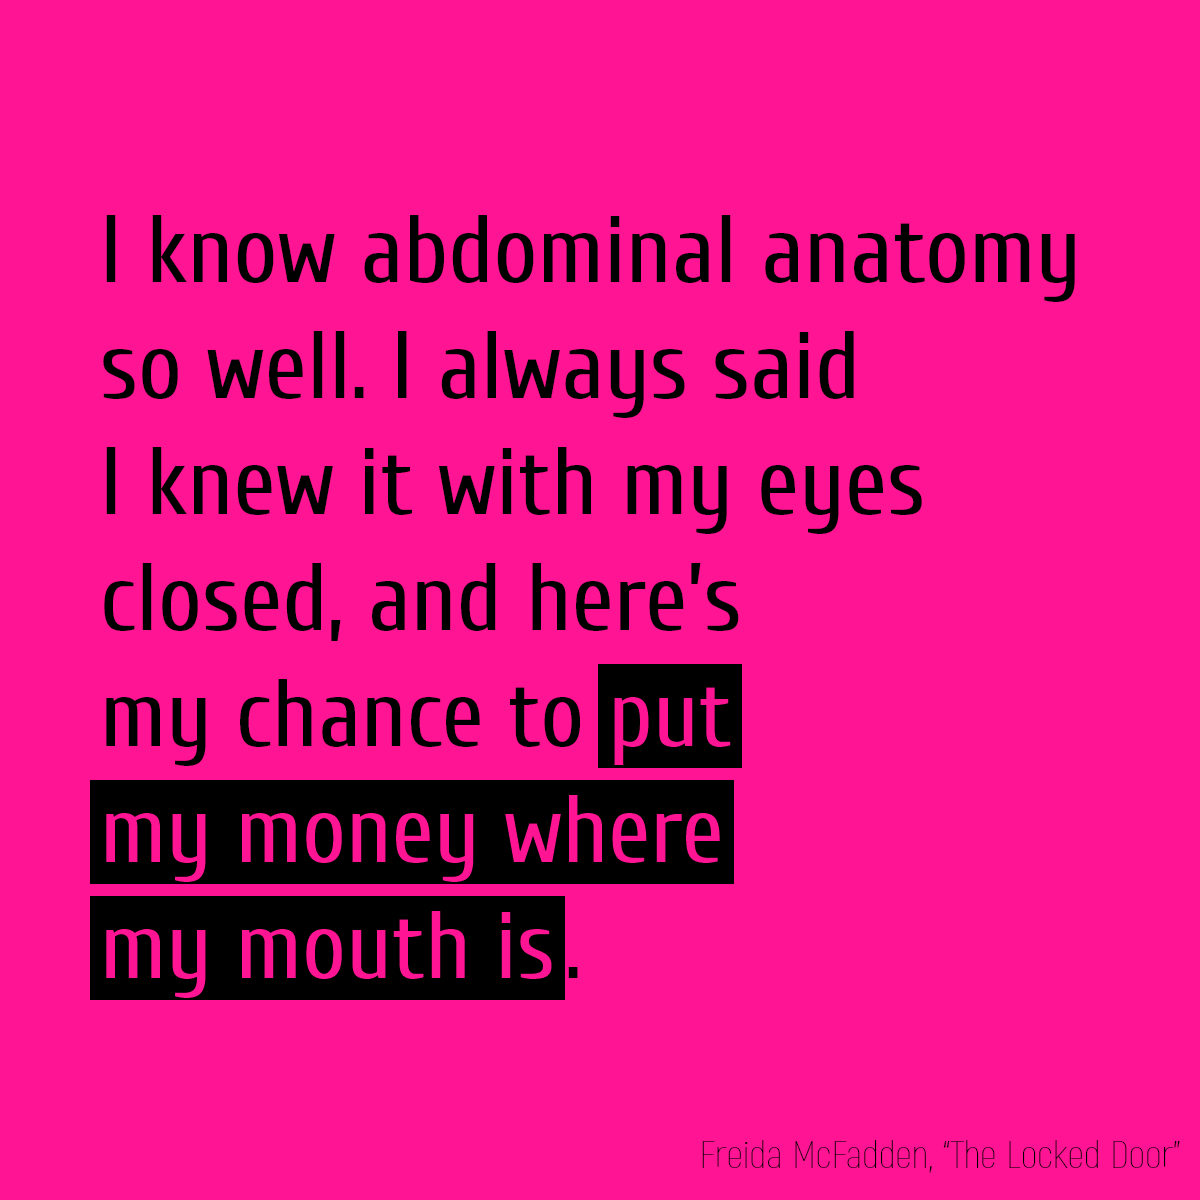 I know abdominal anatomy so well. I always said I knew it with my eyes closed, and here’s my chance to **put my money where my mouth is**.